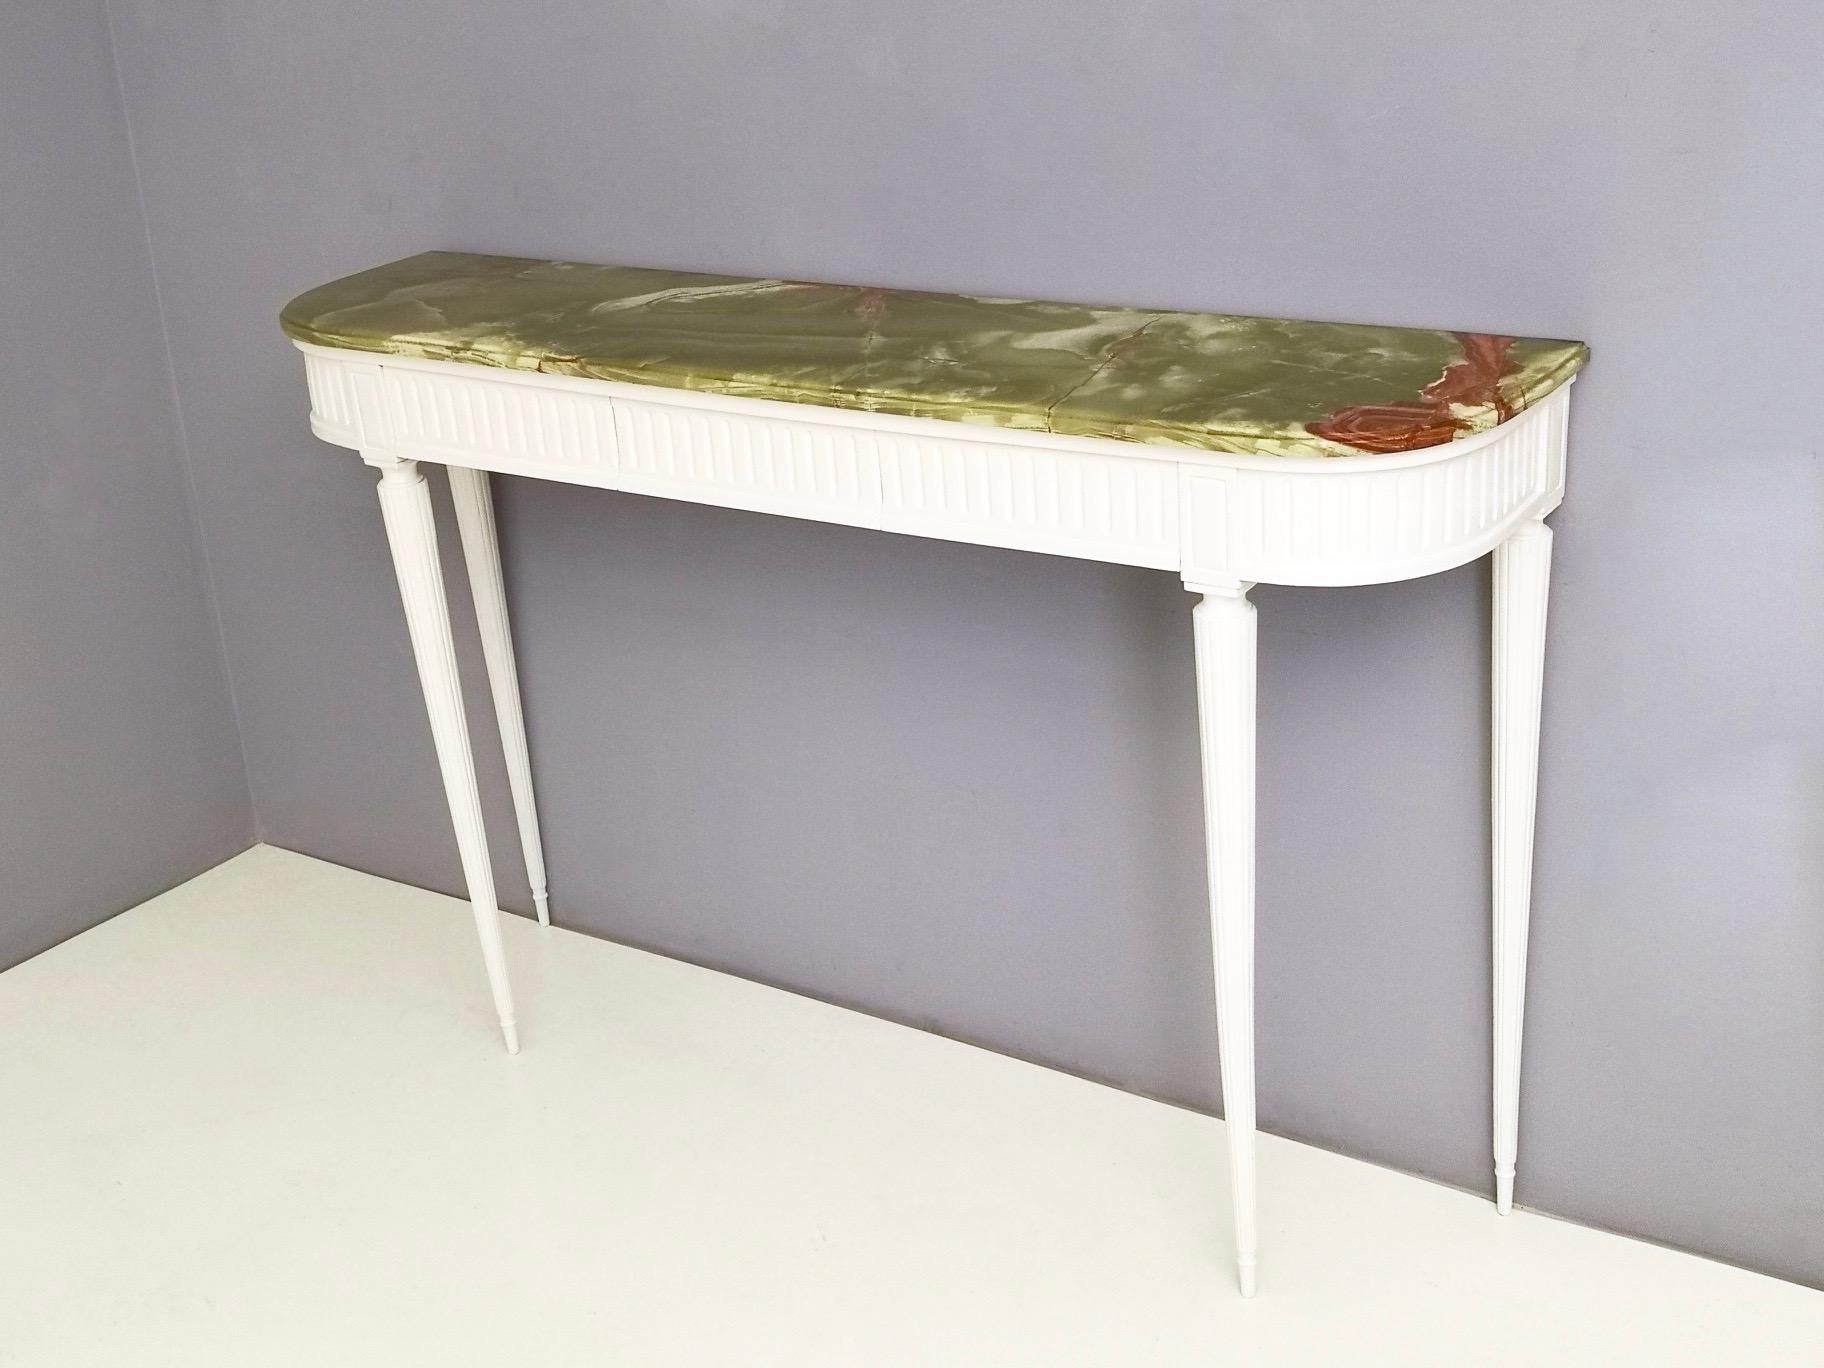 It features a wonderful and thick onyx top and a white lacquered beech frame.
It might show slight traces of use since it's vintage, but it can be considered as in very good original condition and ready to become a piece in a home. 

Measures: